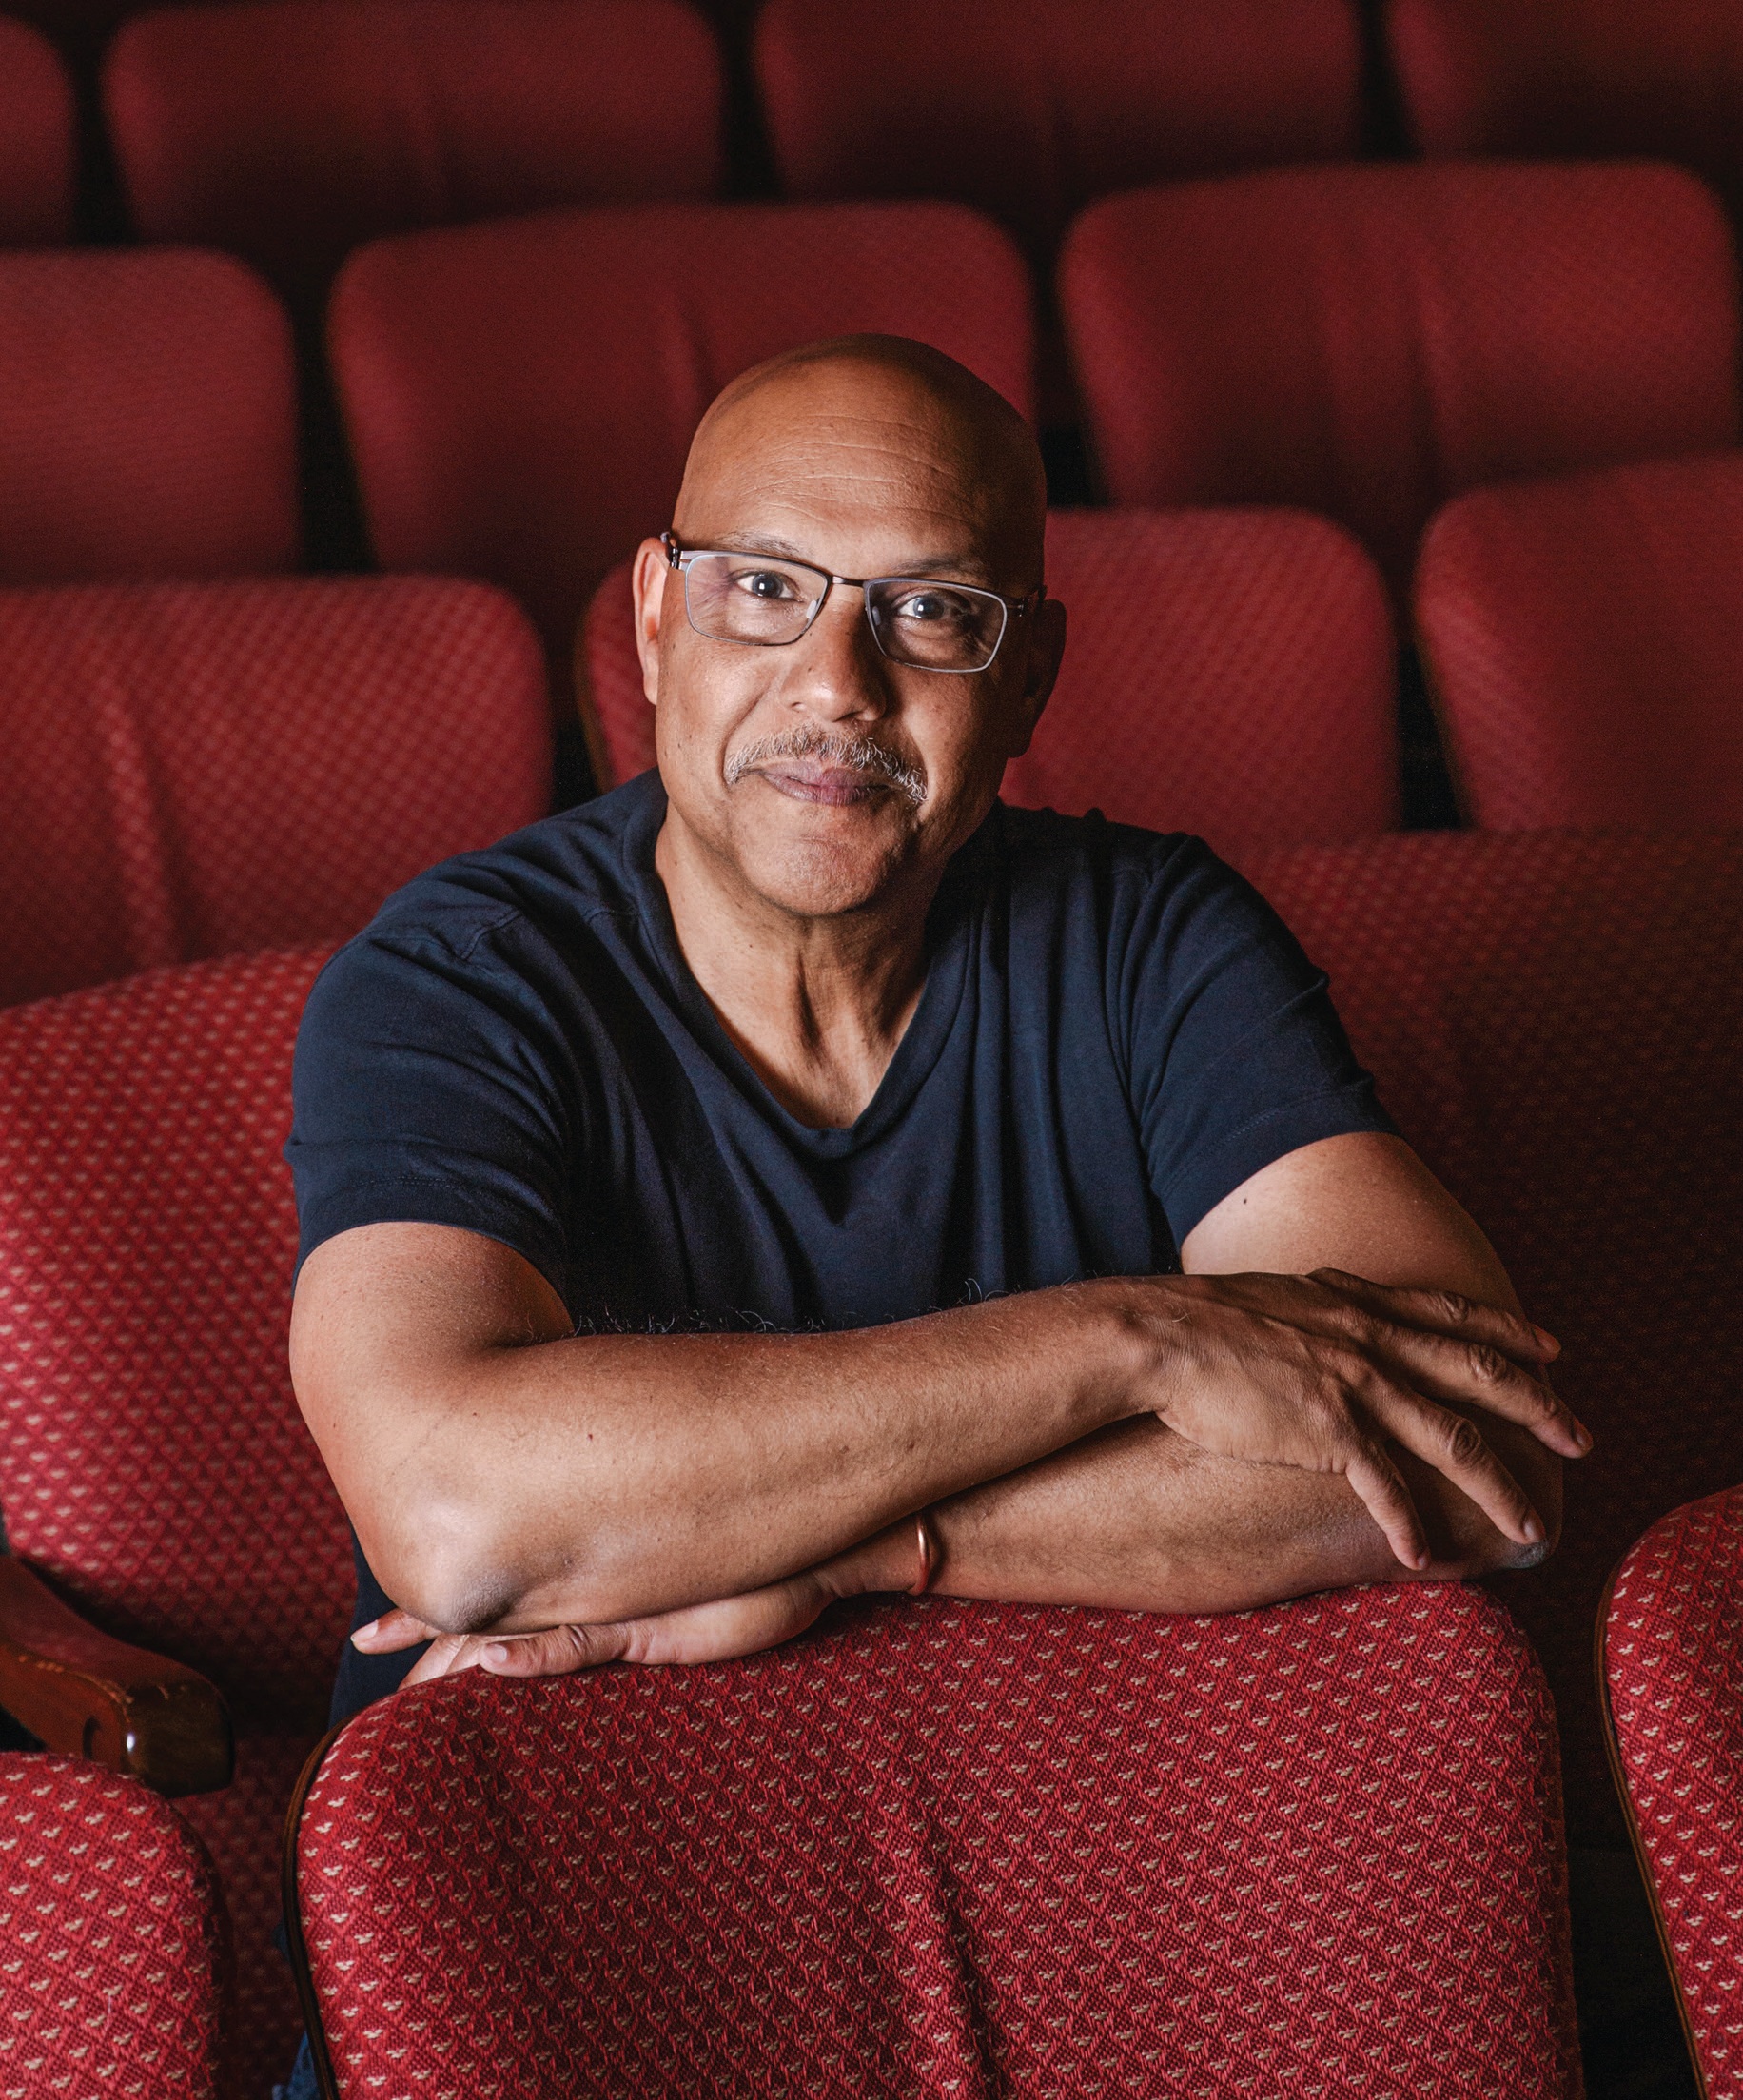 Tim Bond is the new artistic director at TheatreWorks. PHOTO BY HILLARY JEANNE PHOTOGRAPHY